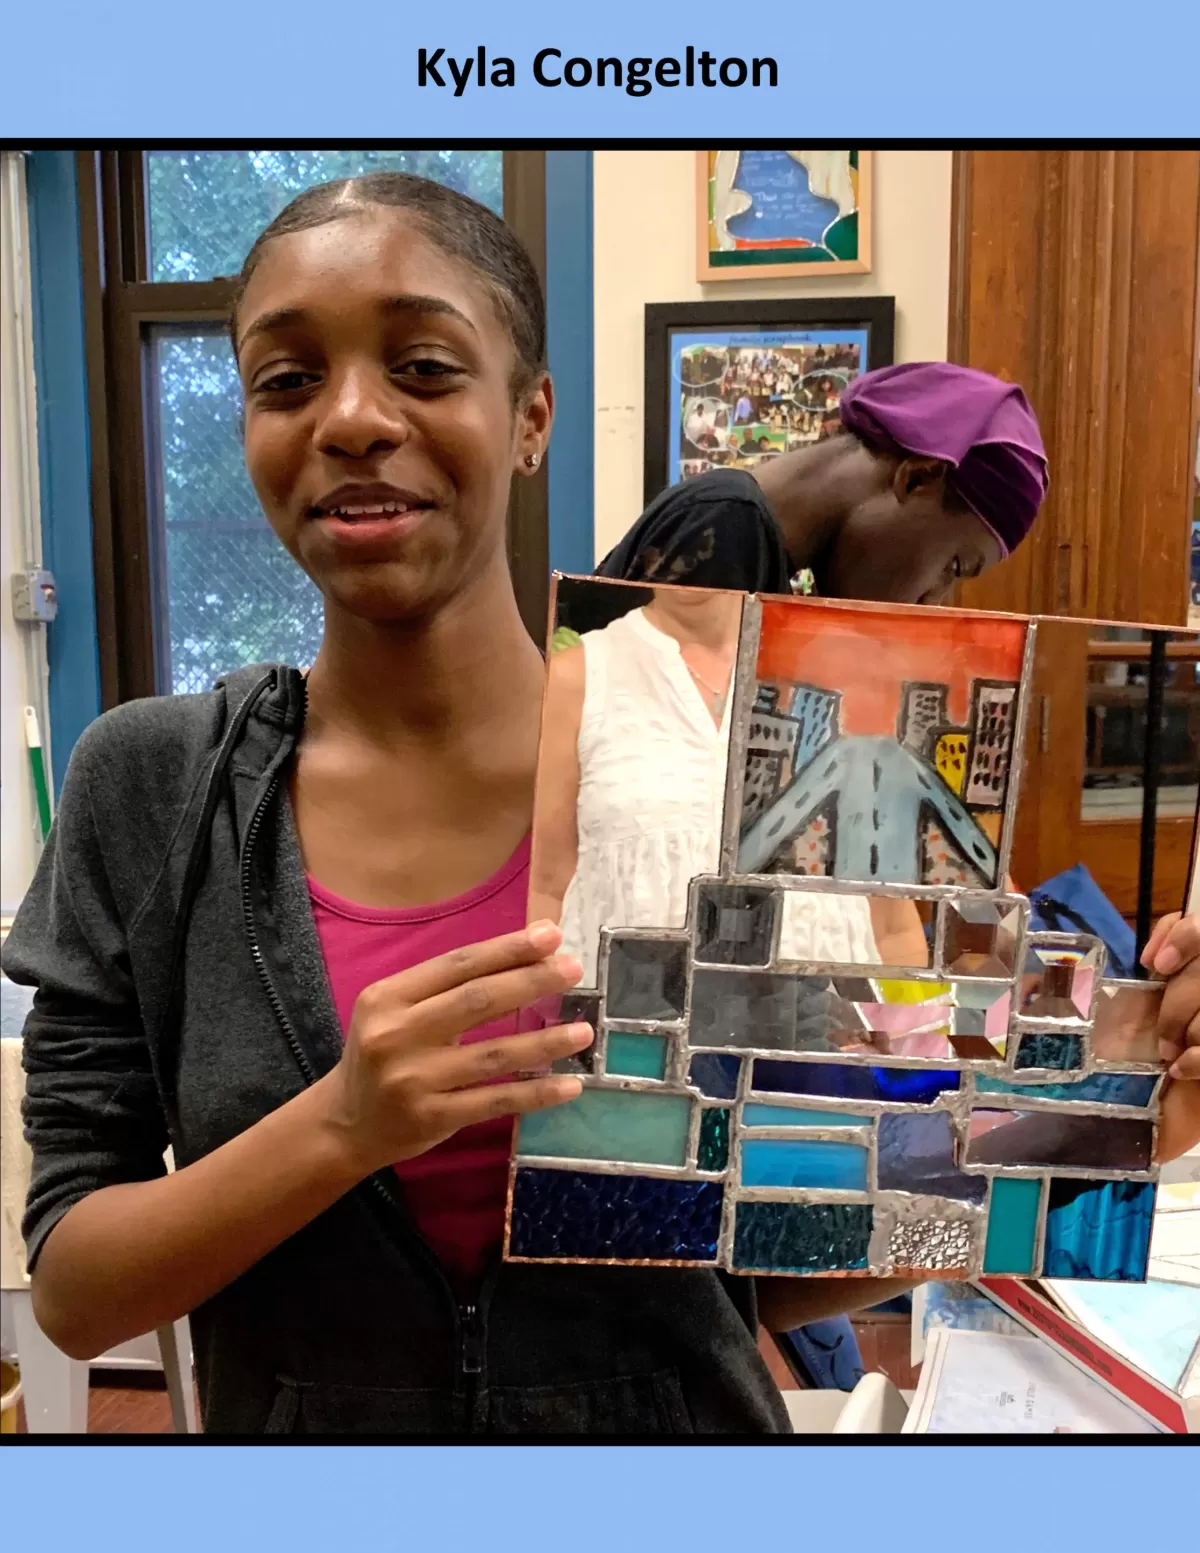 Kyla with her project - Photo Credit: The Stained Glass Project